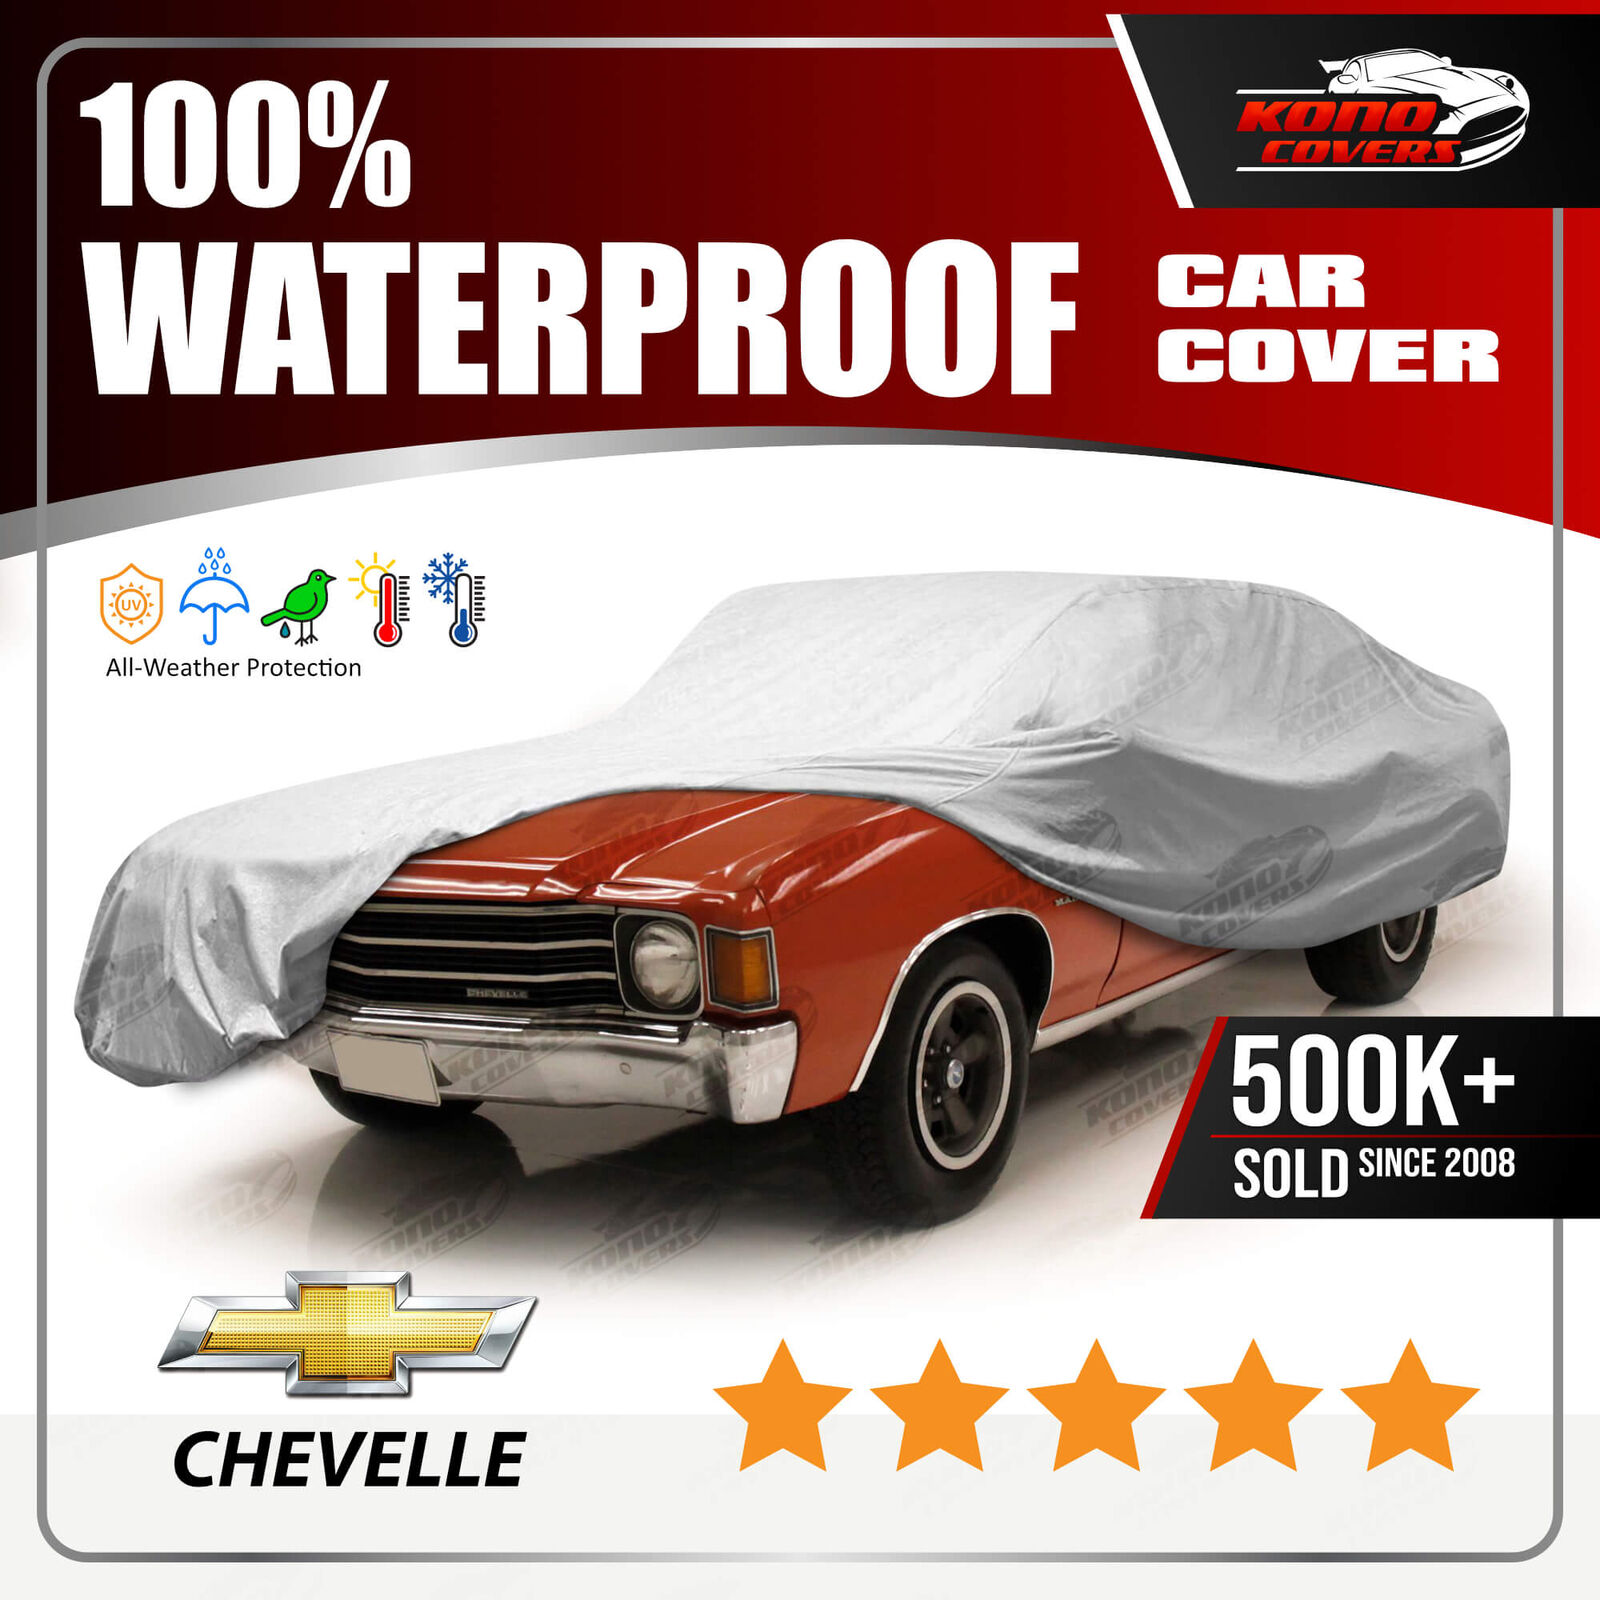 Chevy Chevelle 2-Door 1970 1971 1972 CAR COVER - Protects from ALL-WEATHER